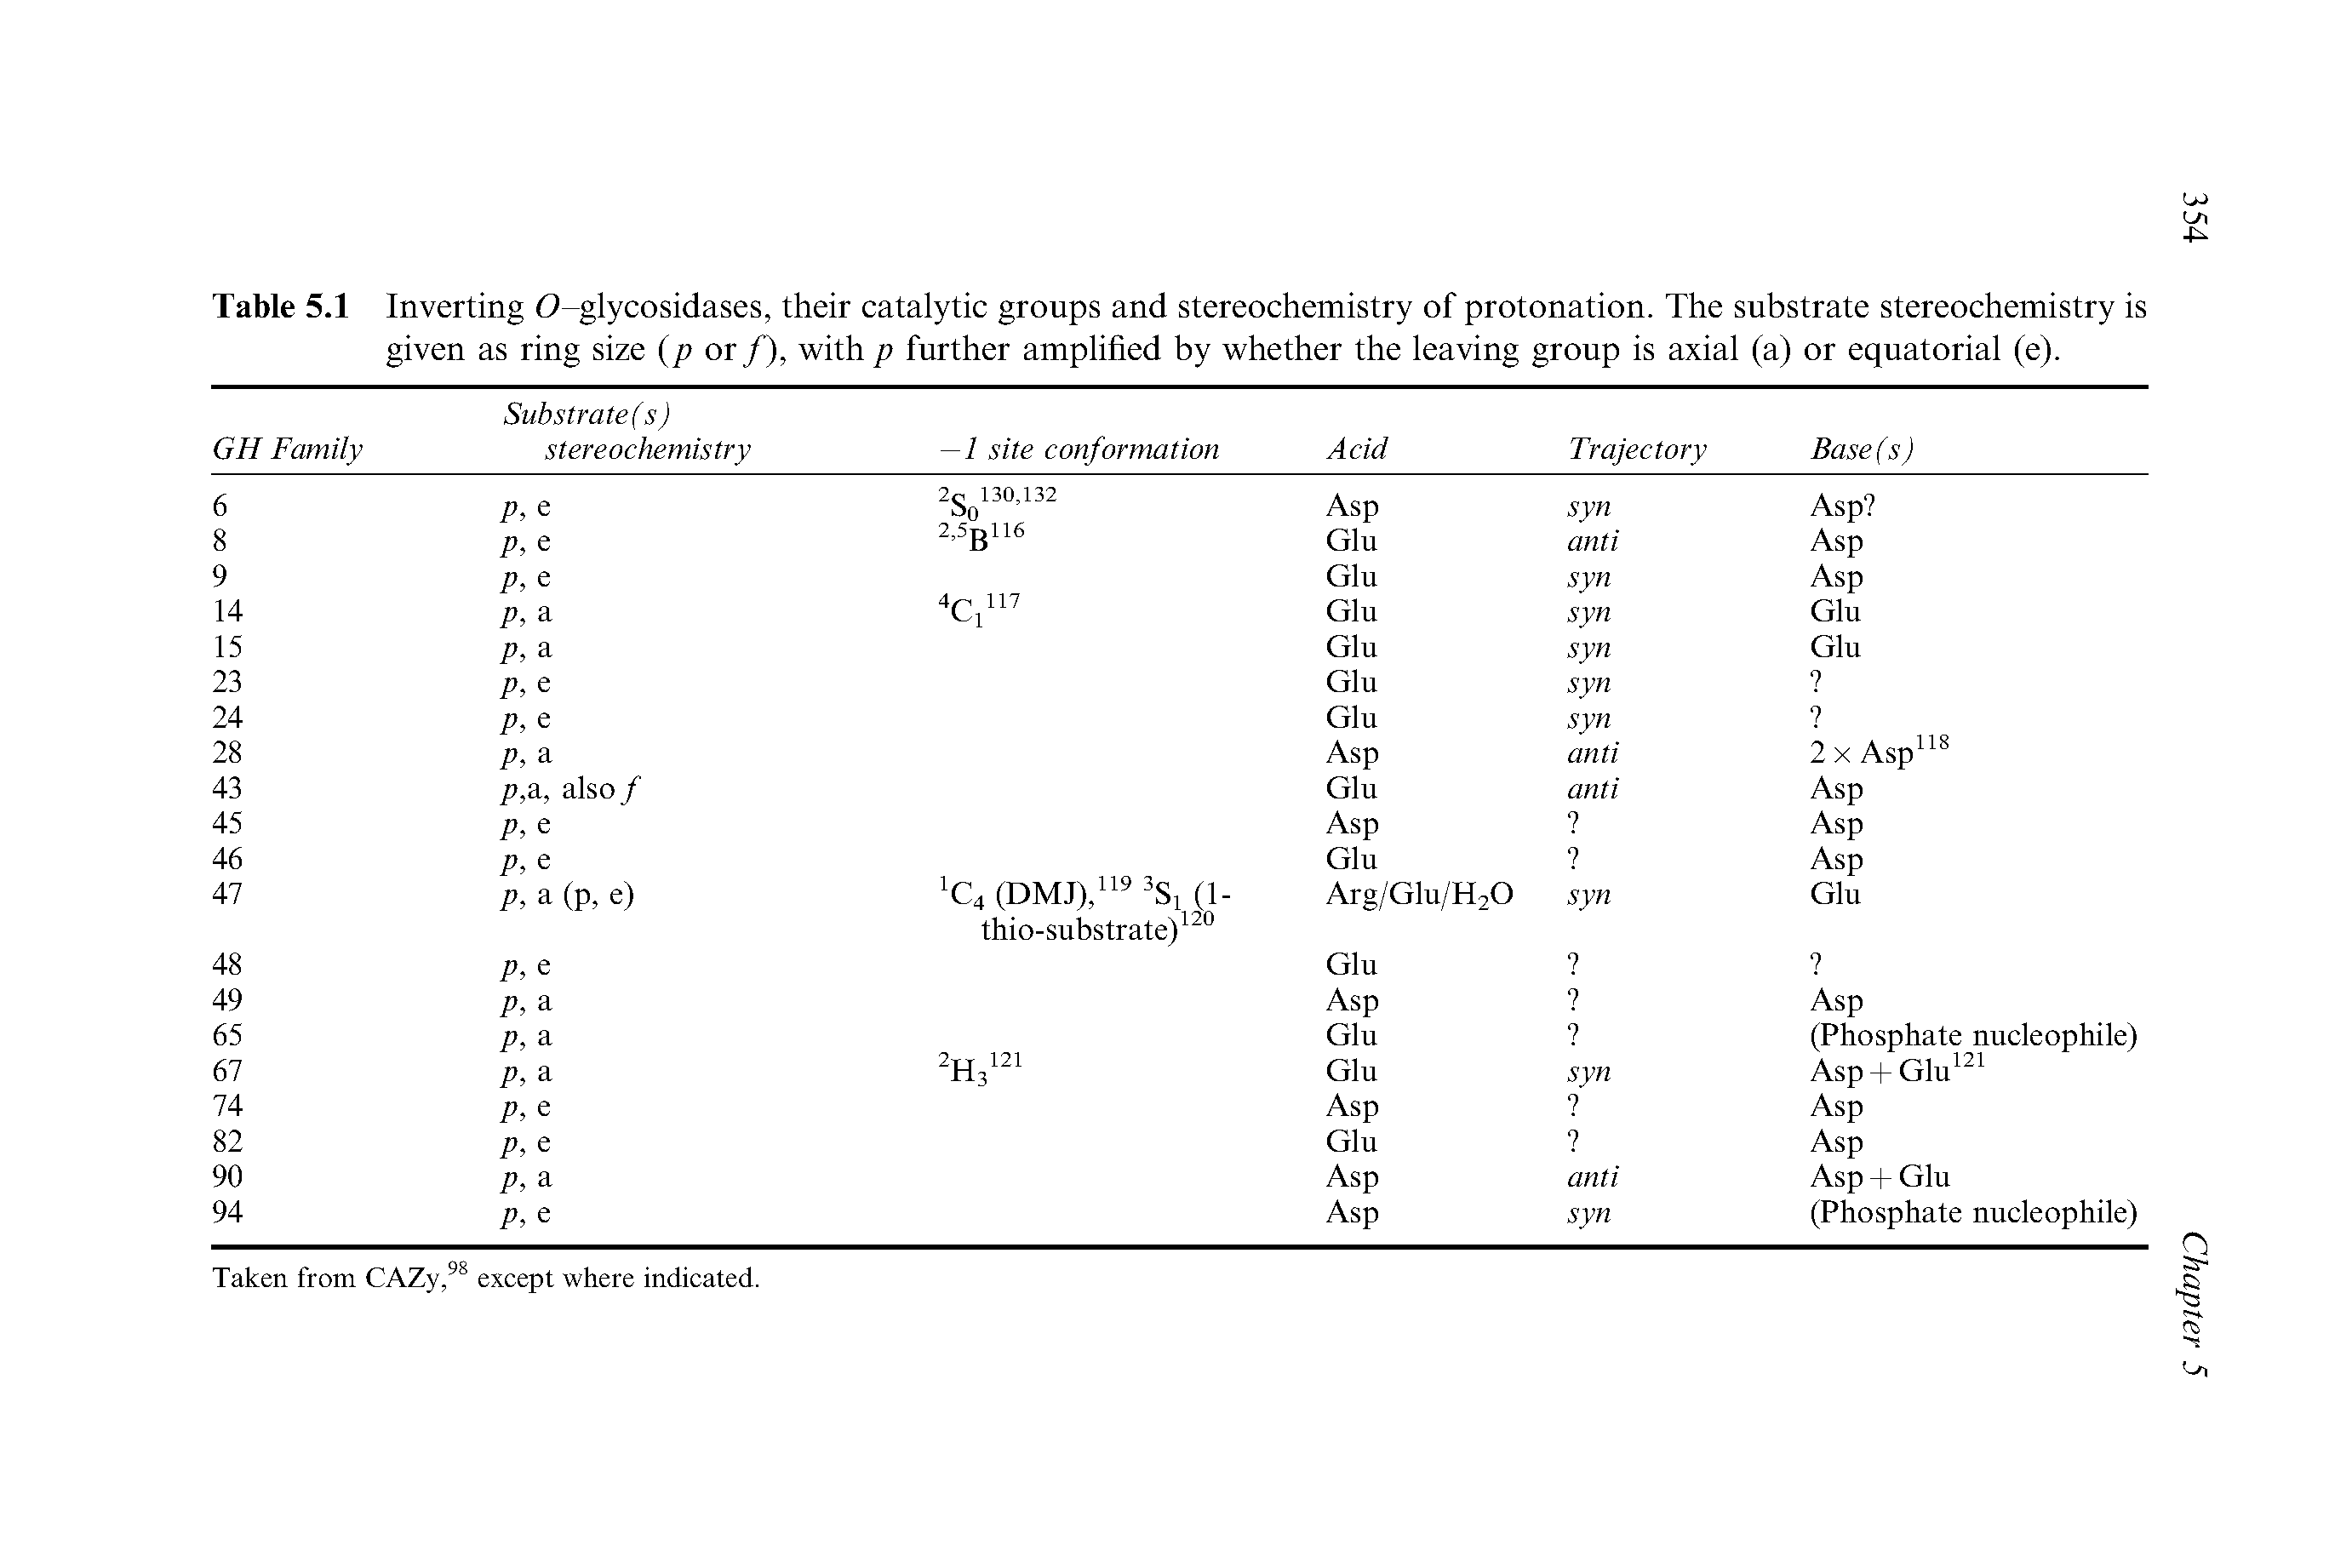 Table 5.1 Inverting ( -glycosidases, their catalytic groups and stereochemistry of protonation. The substrate stereochemistry is given as ring size p or /), with p further amplified by whether the leaving group is axial (a) or equatorial (e).